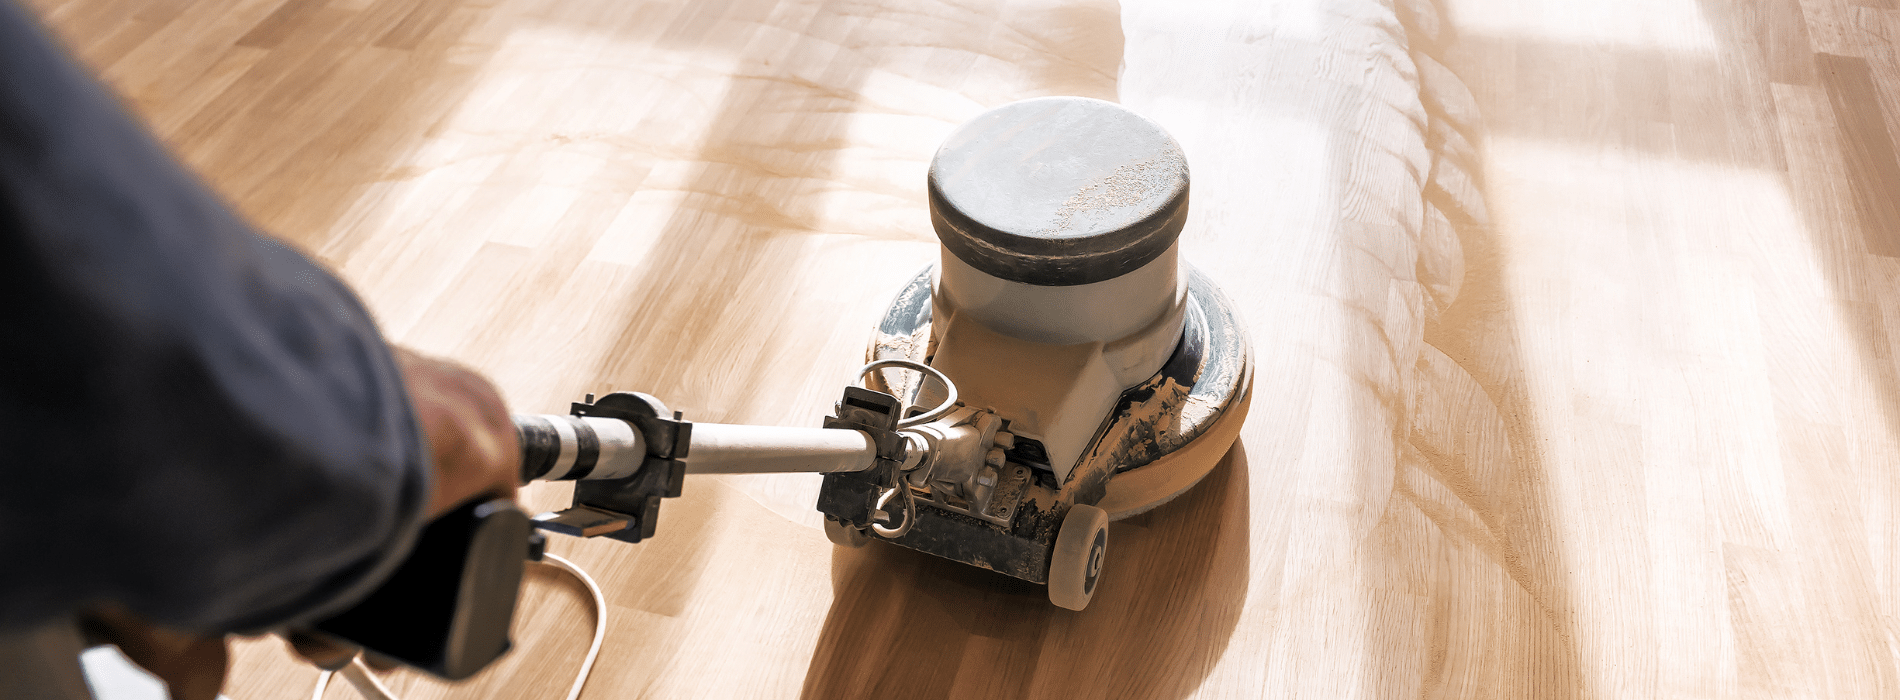 Floor Sanding Craftsmanship: The Essential Guide to Perfect Floors